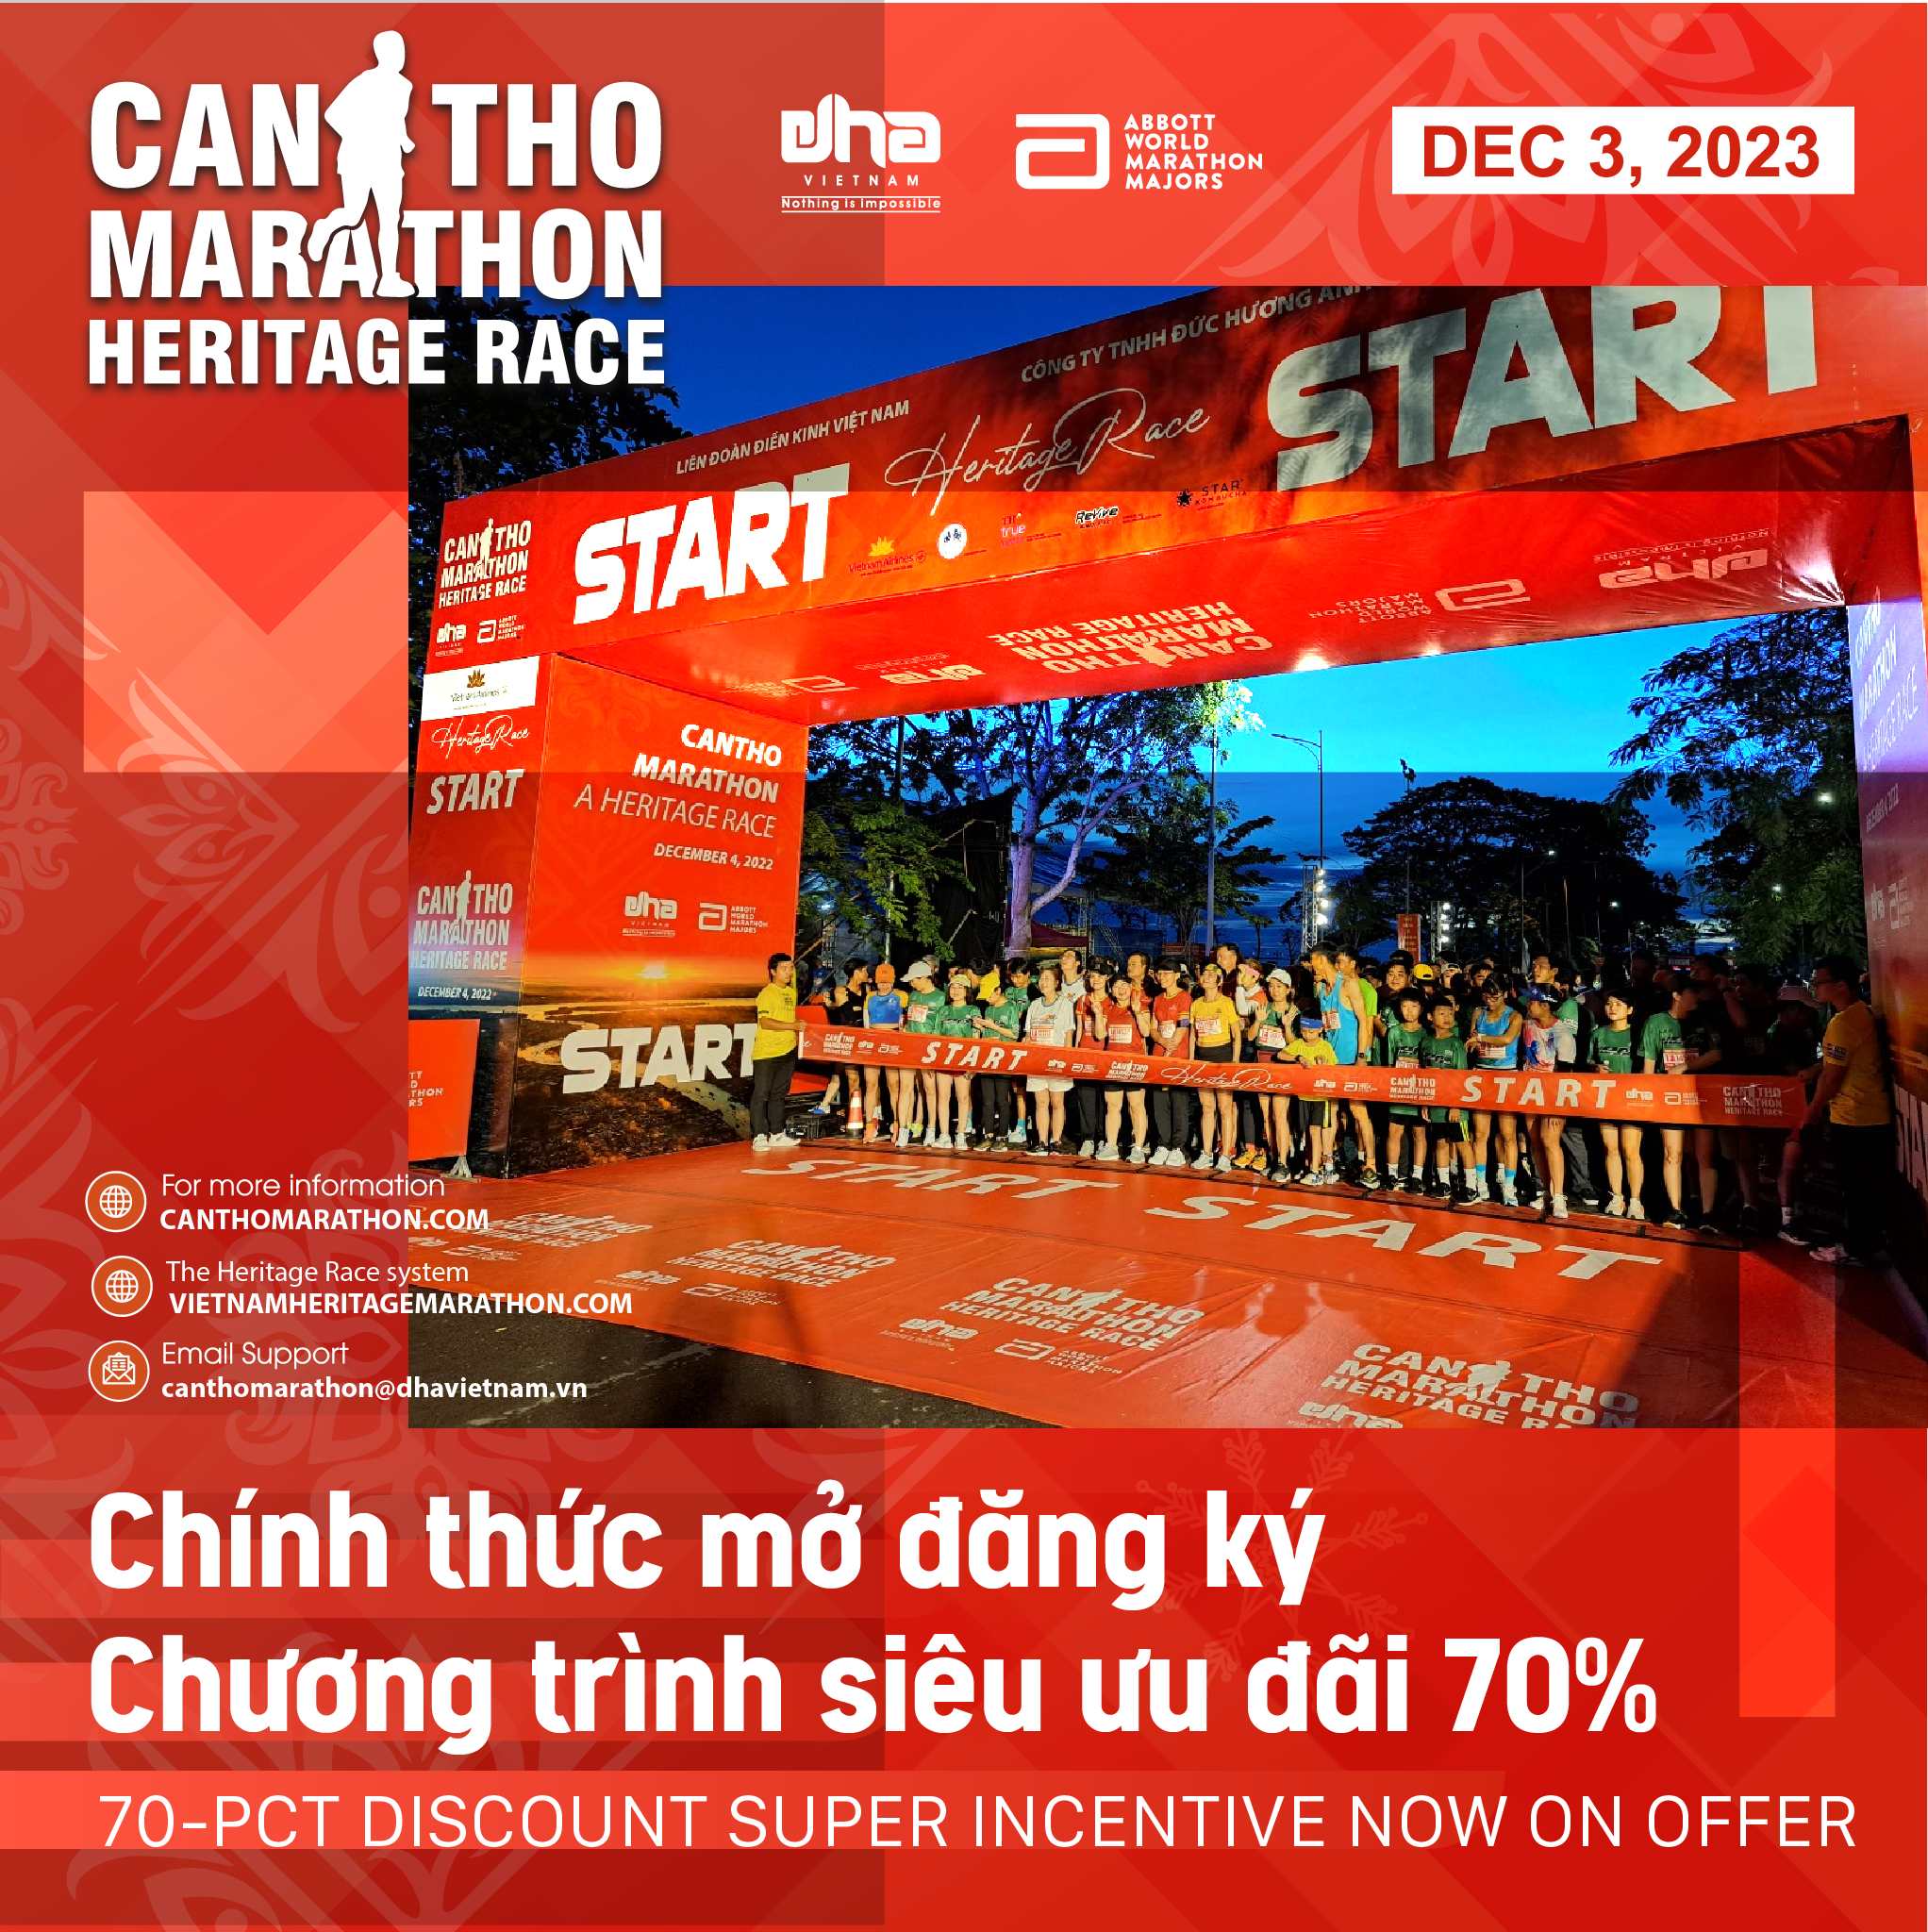 Can Tho Marathon - A Heritage Race 2023 Offers Super Incentive